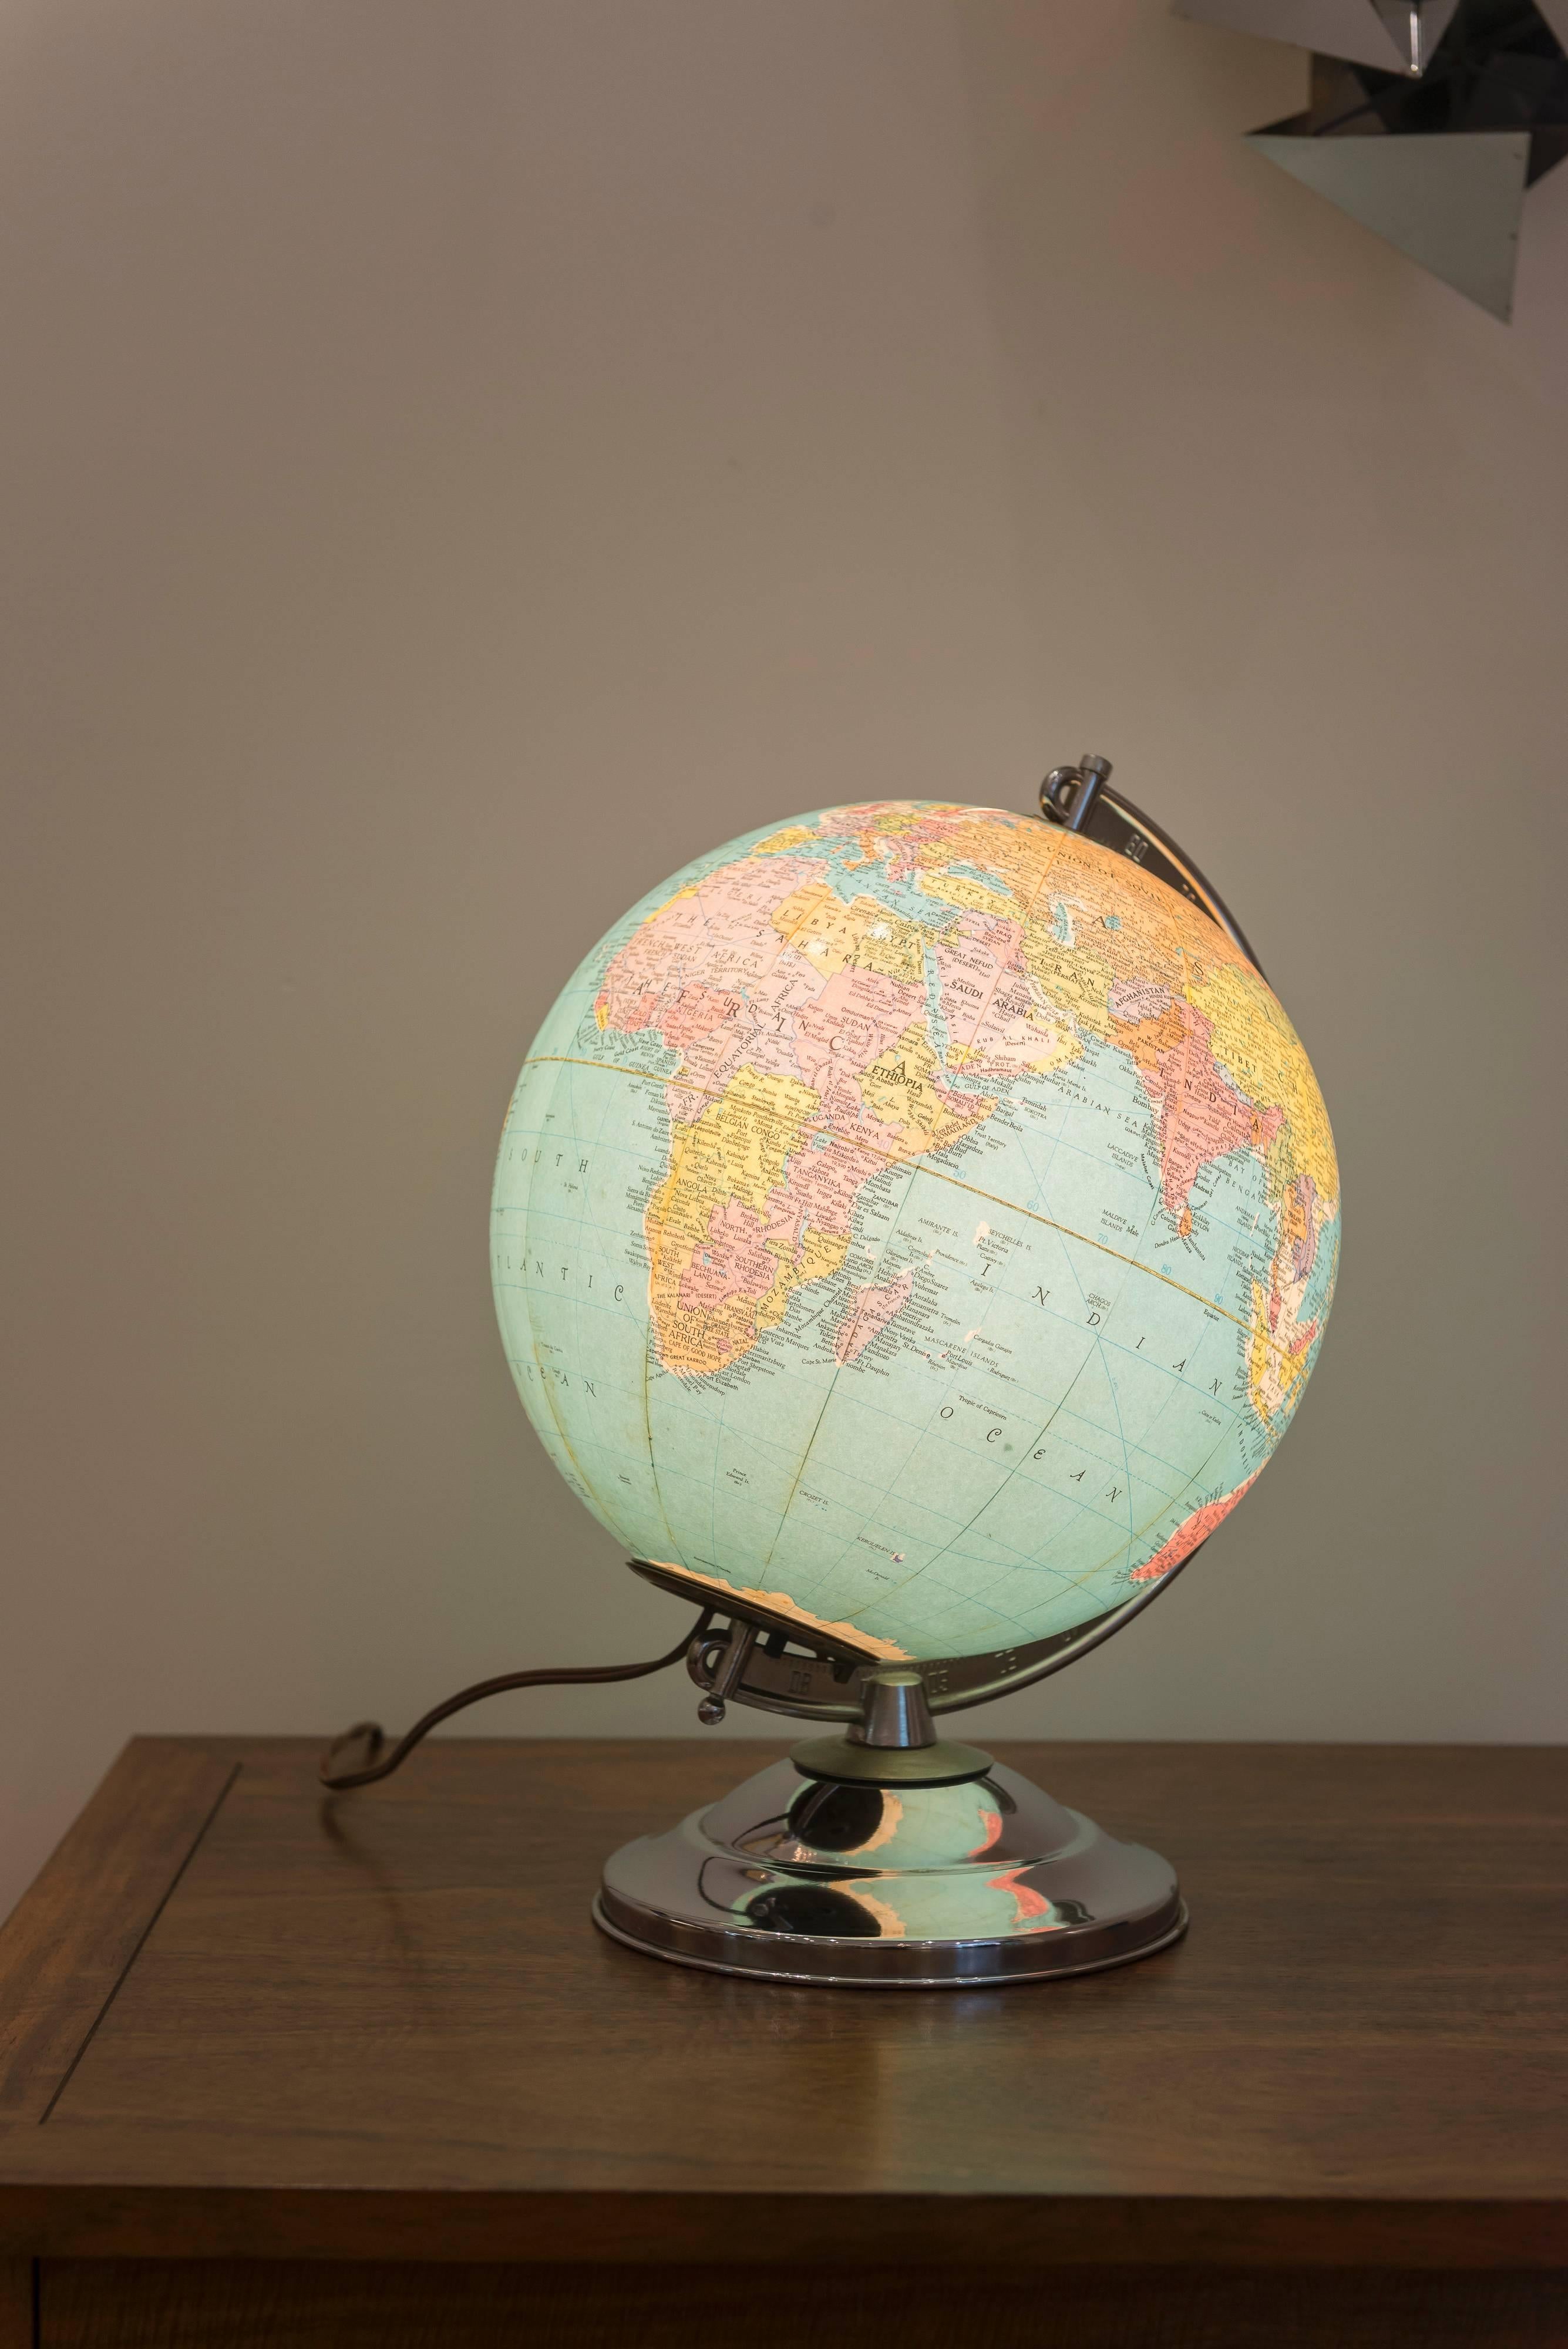 The most perfect illuminated replogle globe I've ever seen. The chrome is very clean and the map is near perfect with 